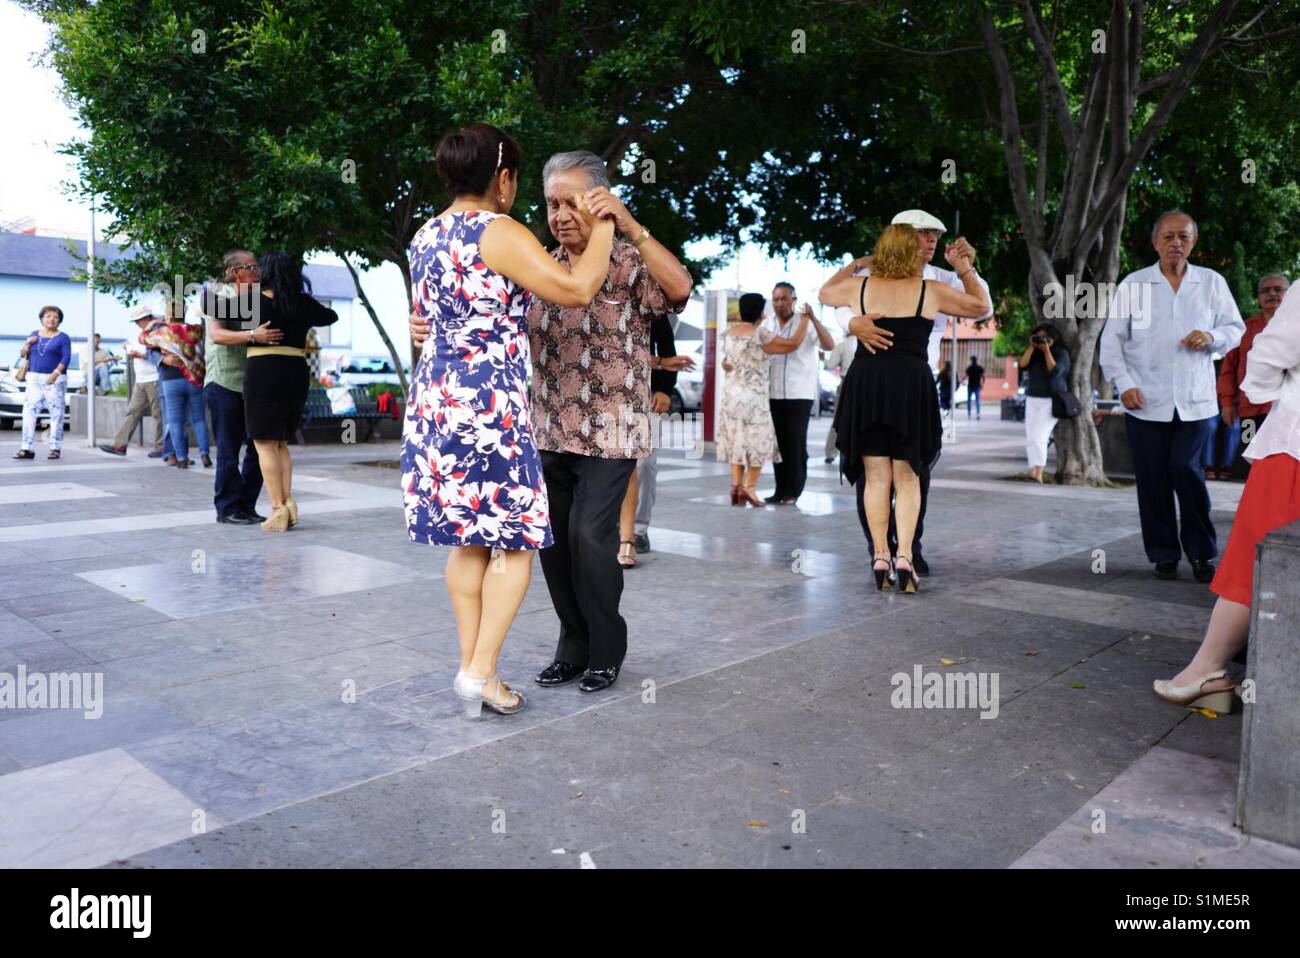 Old people dancing in the park Stock Photo